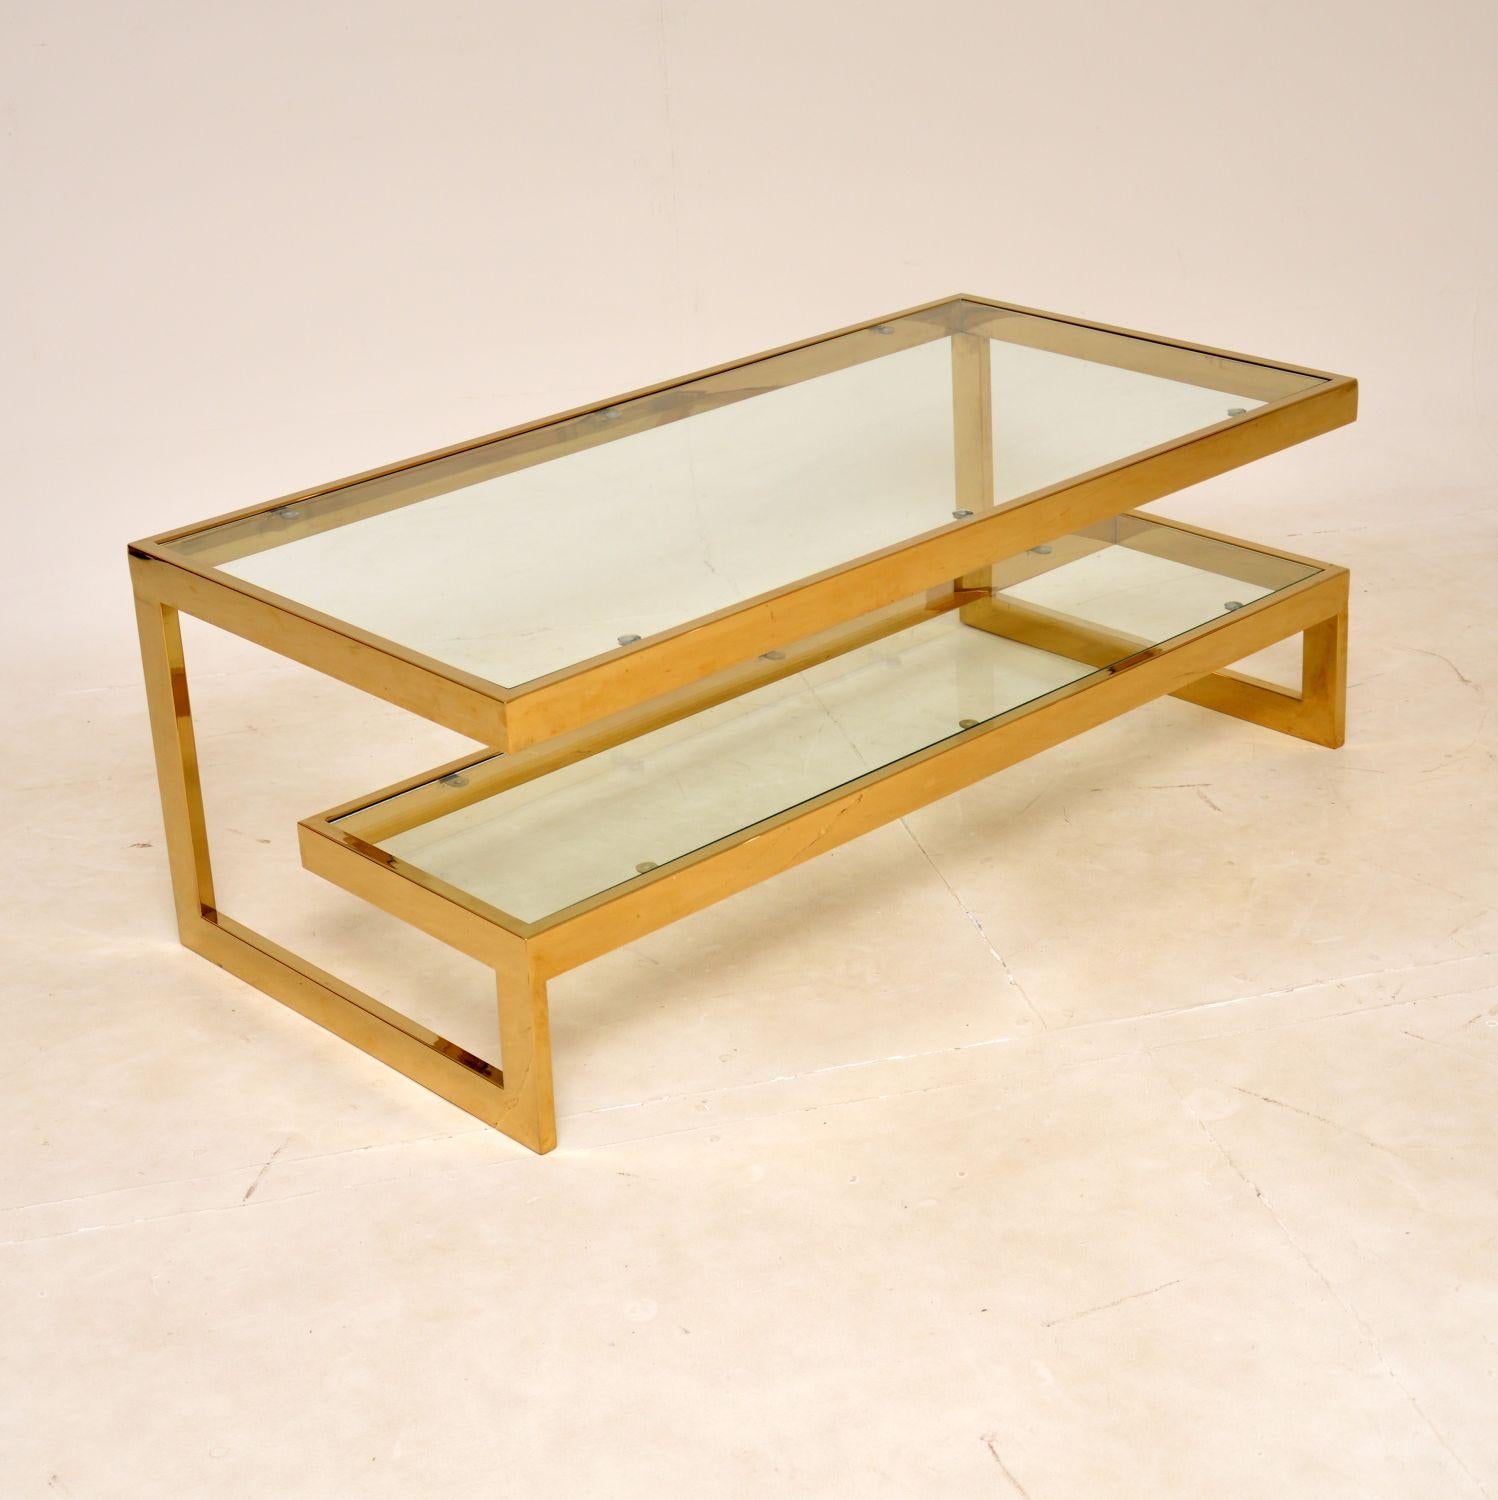 A very stylish and extremely well made vintage coffee table in gold plated steel. This was made in Belgium, it dates from around the 1970’s.

The quality is excellent, this is a large and impressive size and has a gorgeous design. There is a useful